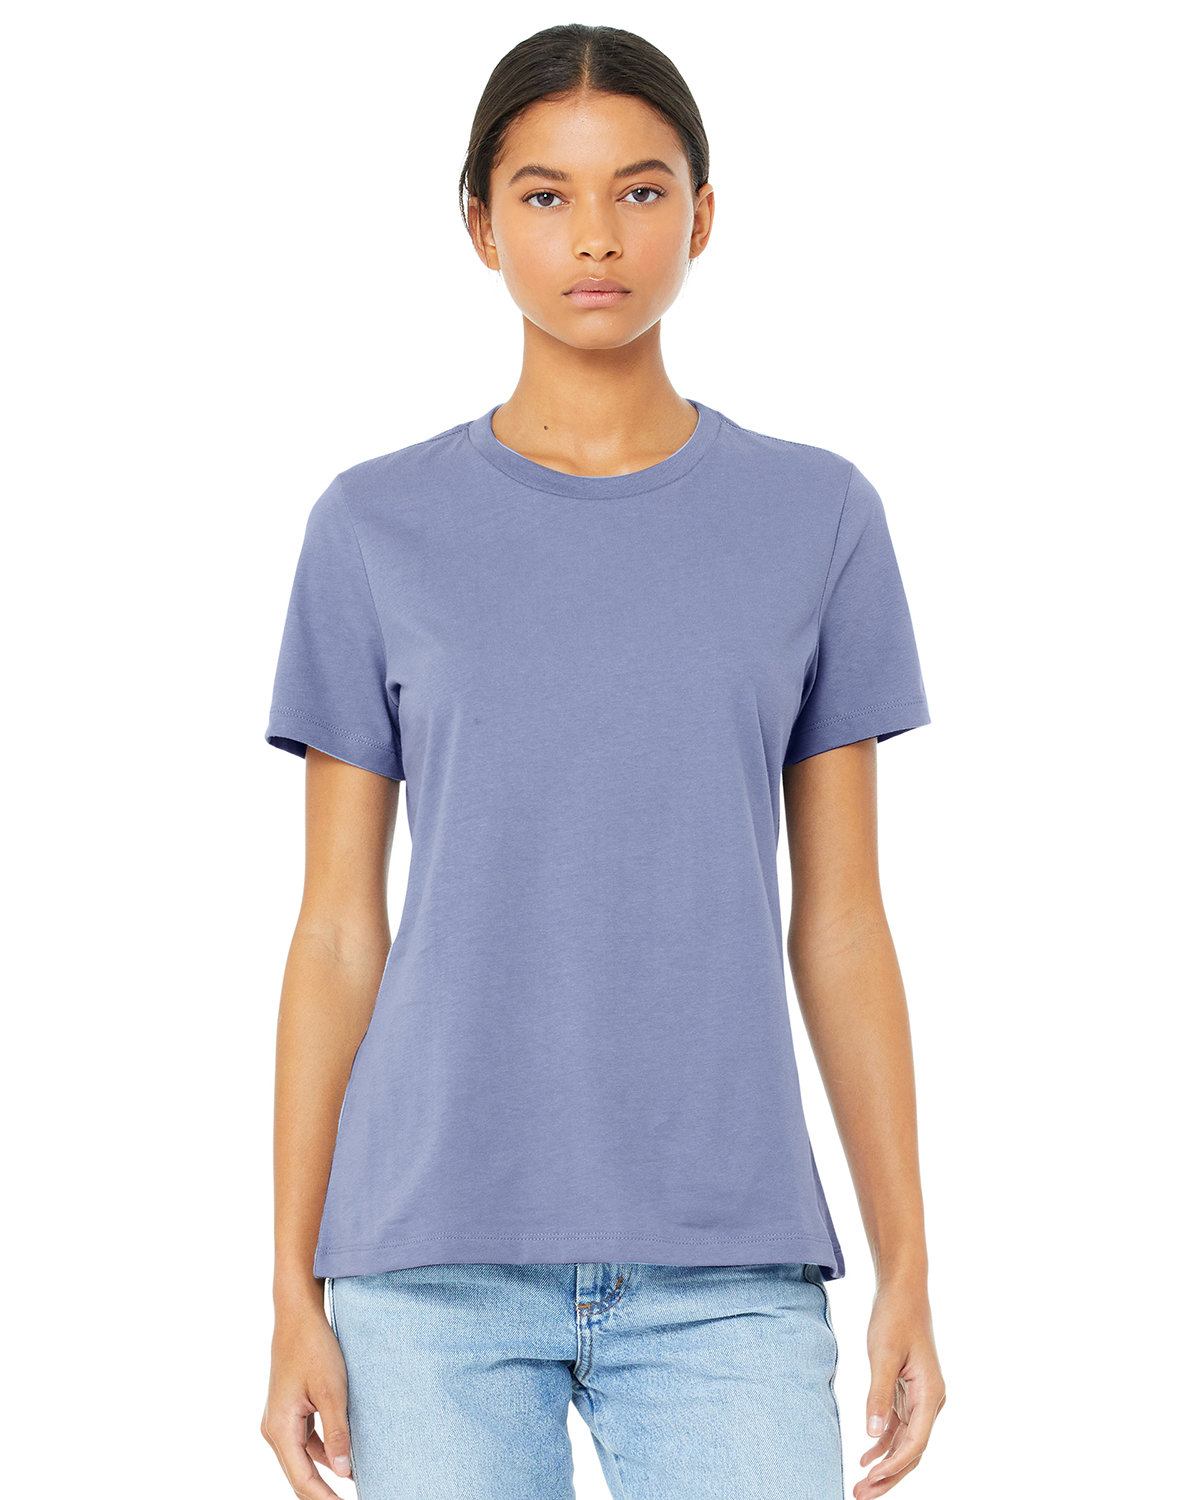 Bella + Canvas Ladies' Relaxed Jersey Short-Sleeve T-Shirt LAVENDER BLUE 